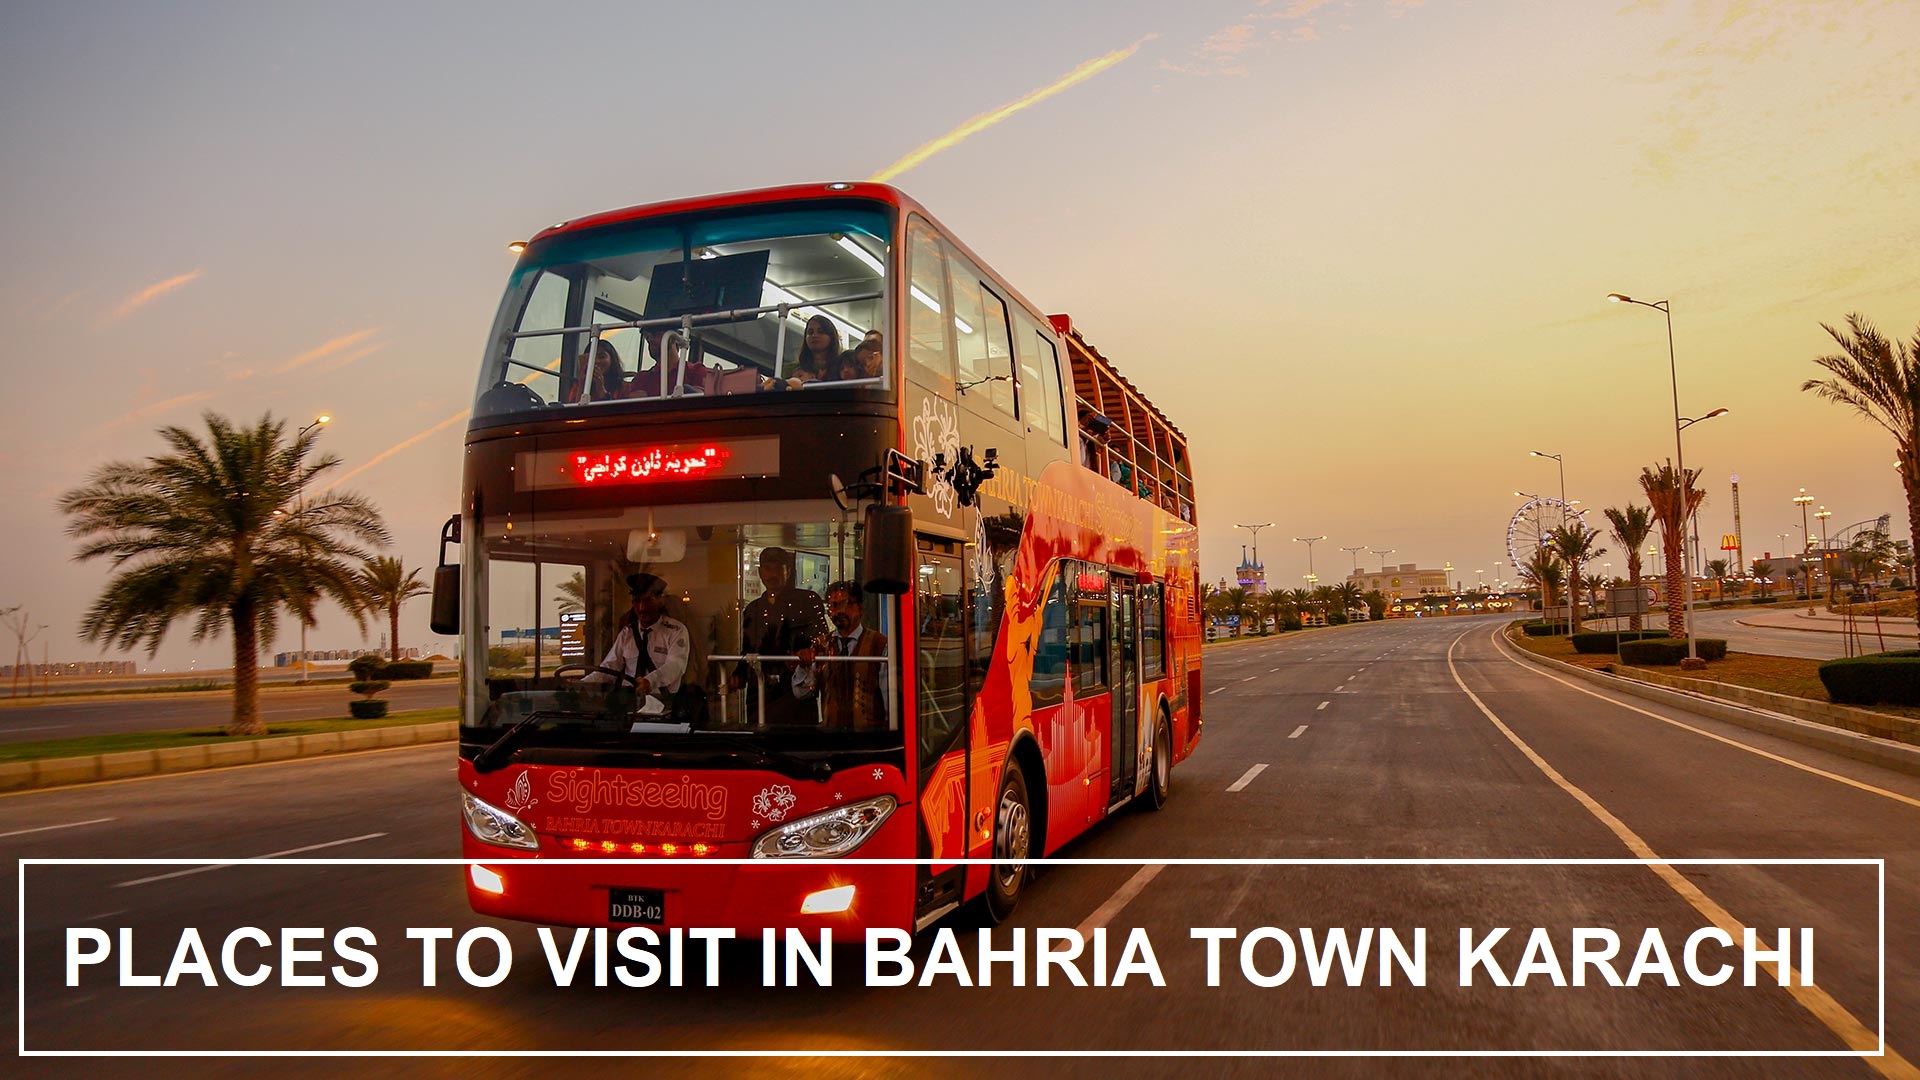 Places to visit in bahria town karachi